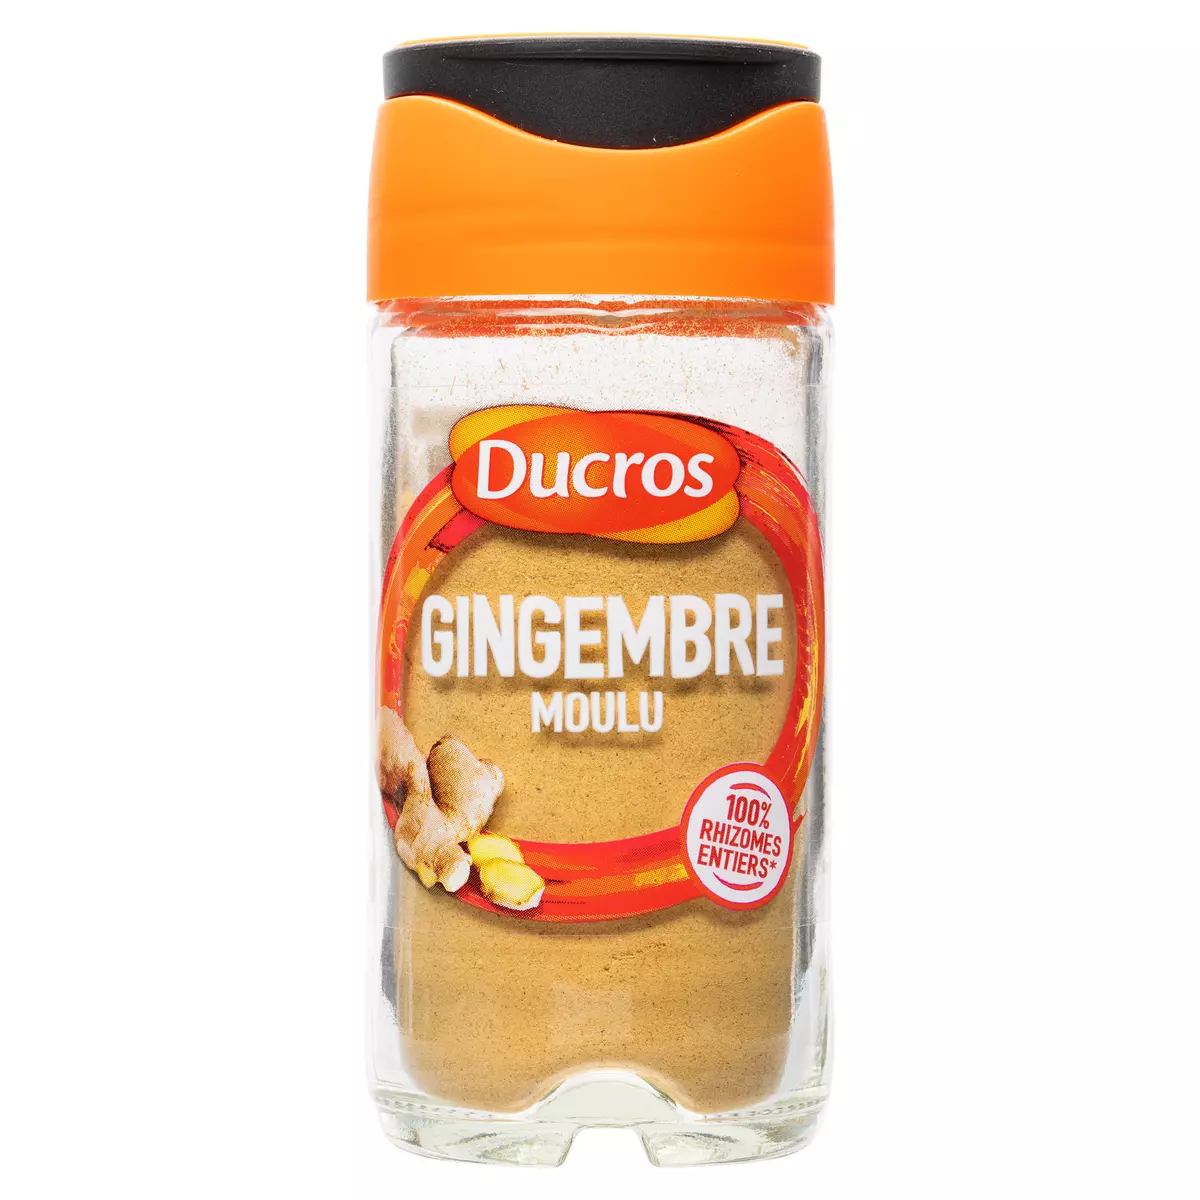 DUCROS Gingembre moulu 26g